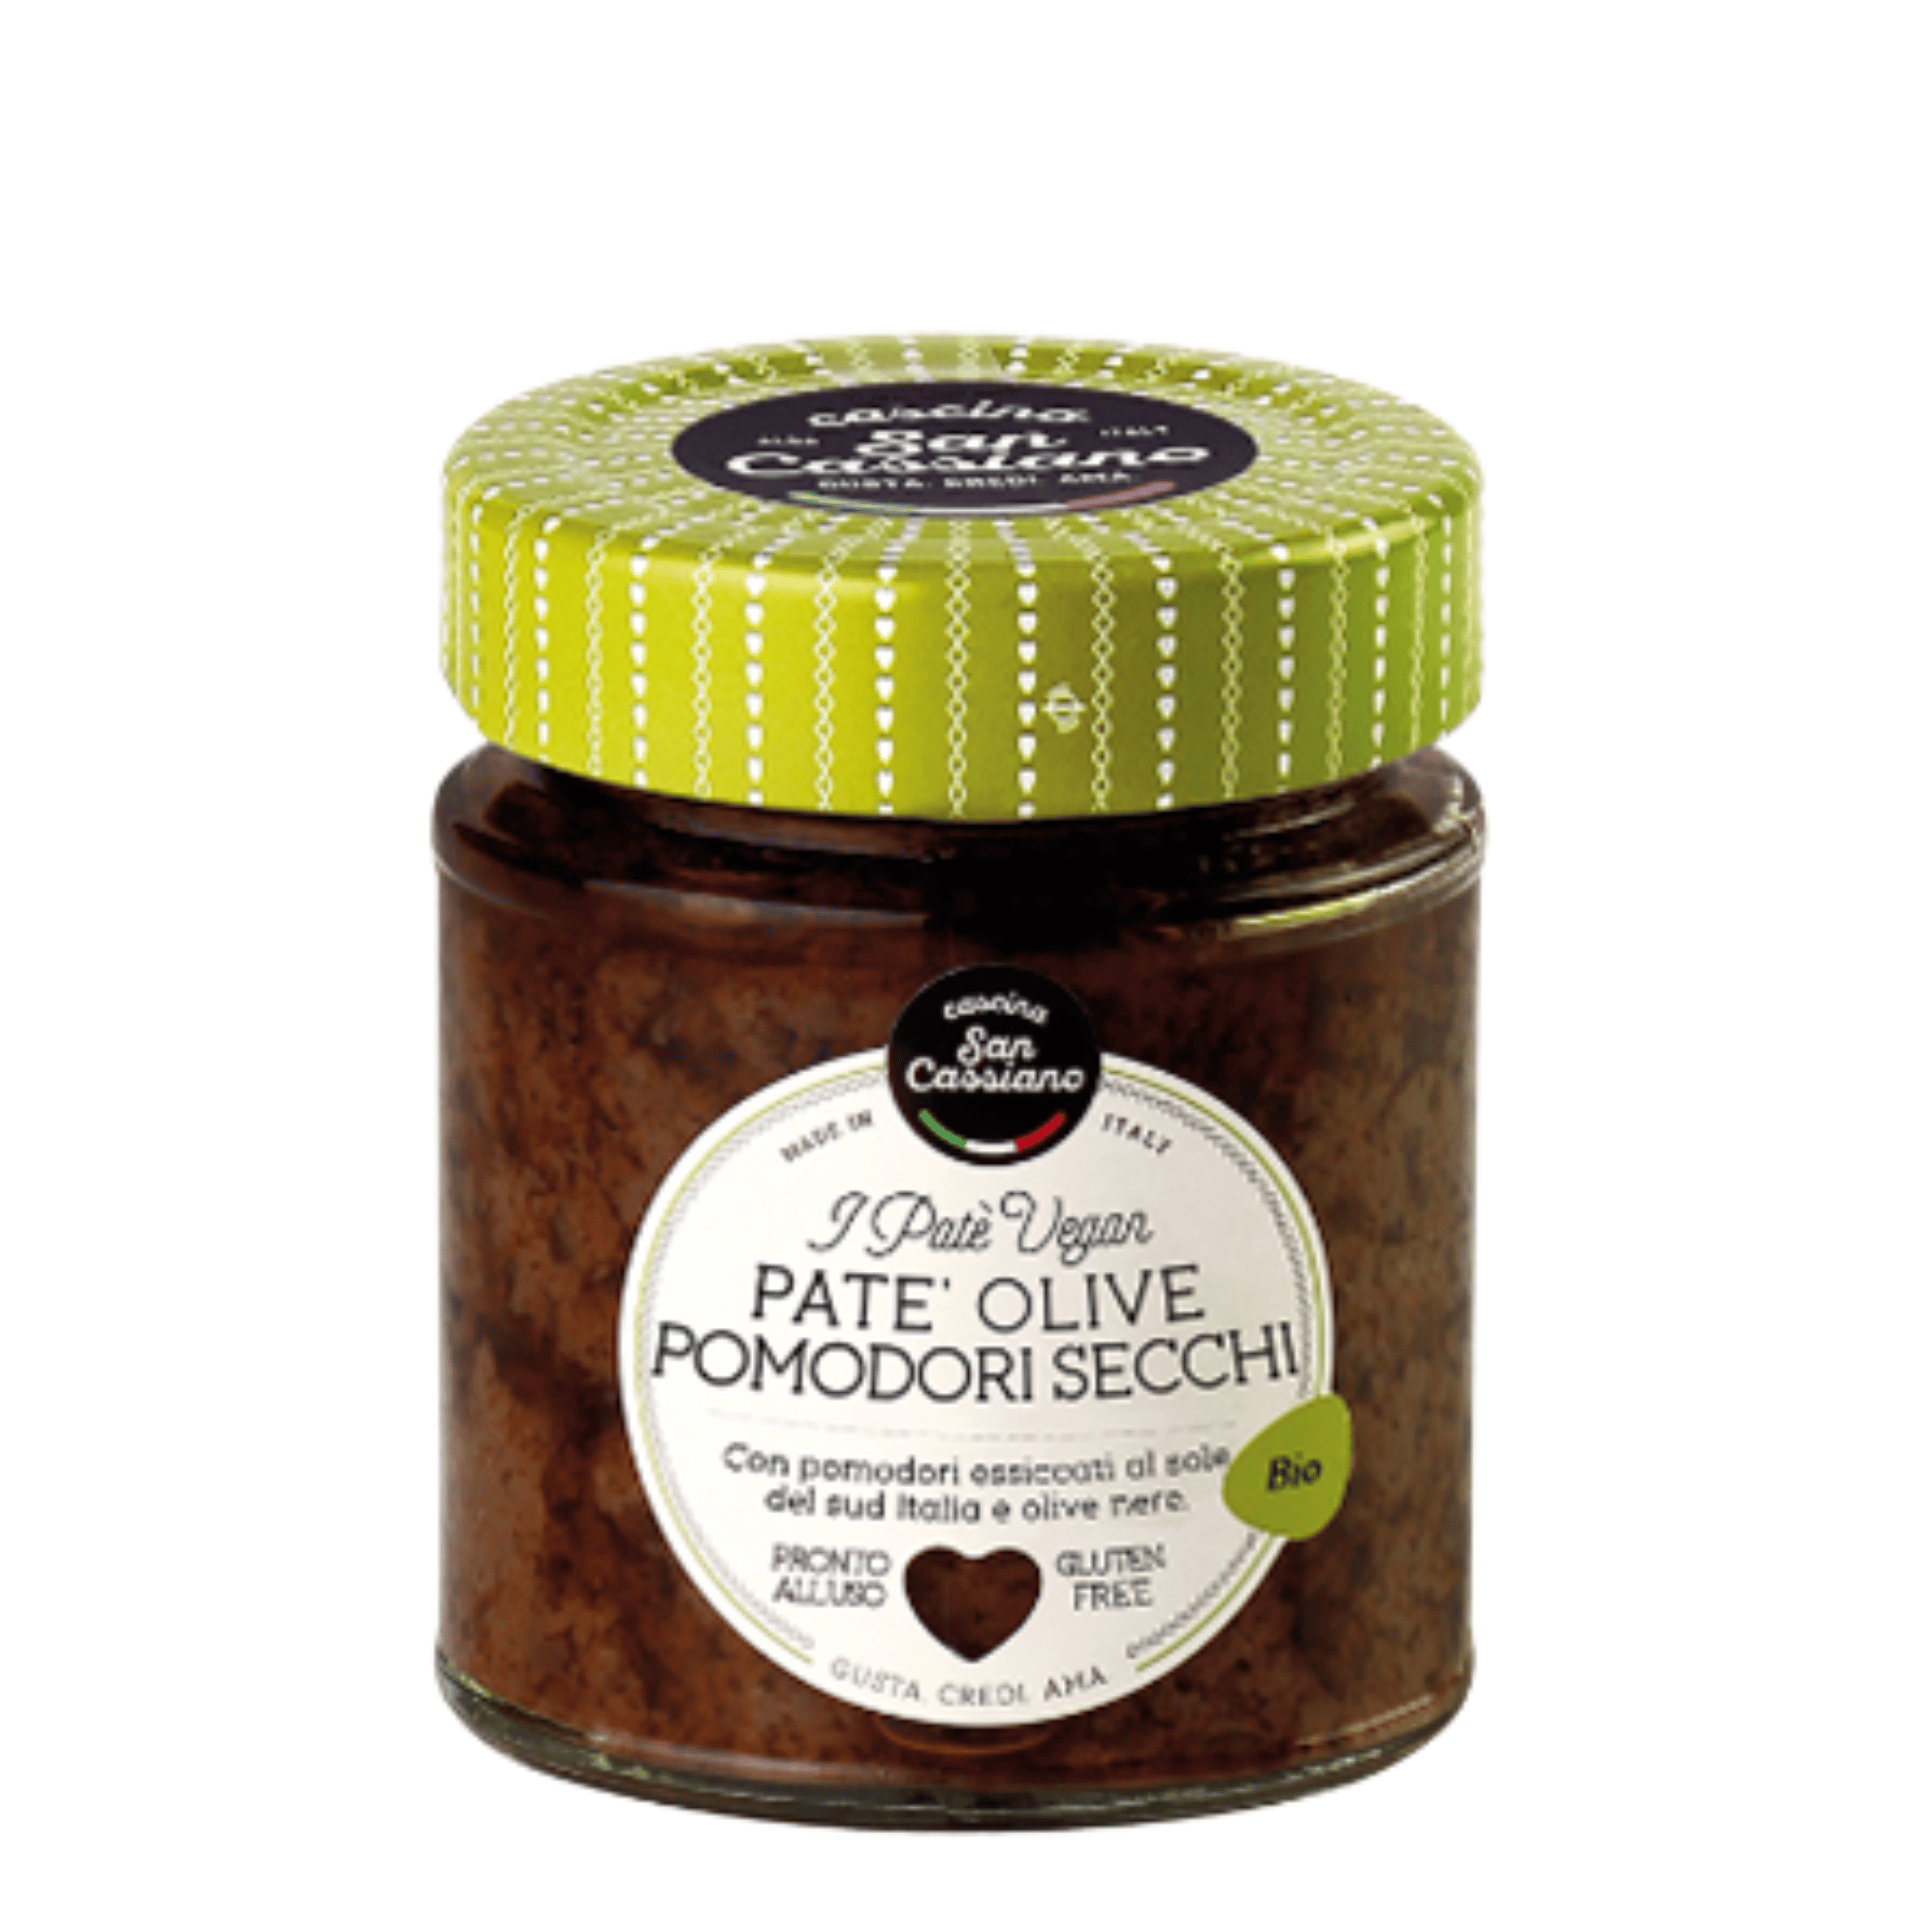 Organic Sun-dried Tomatoes and Olive Tapenade